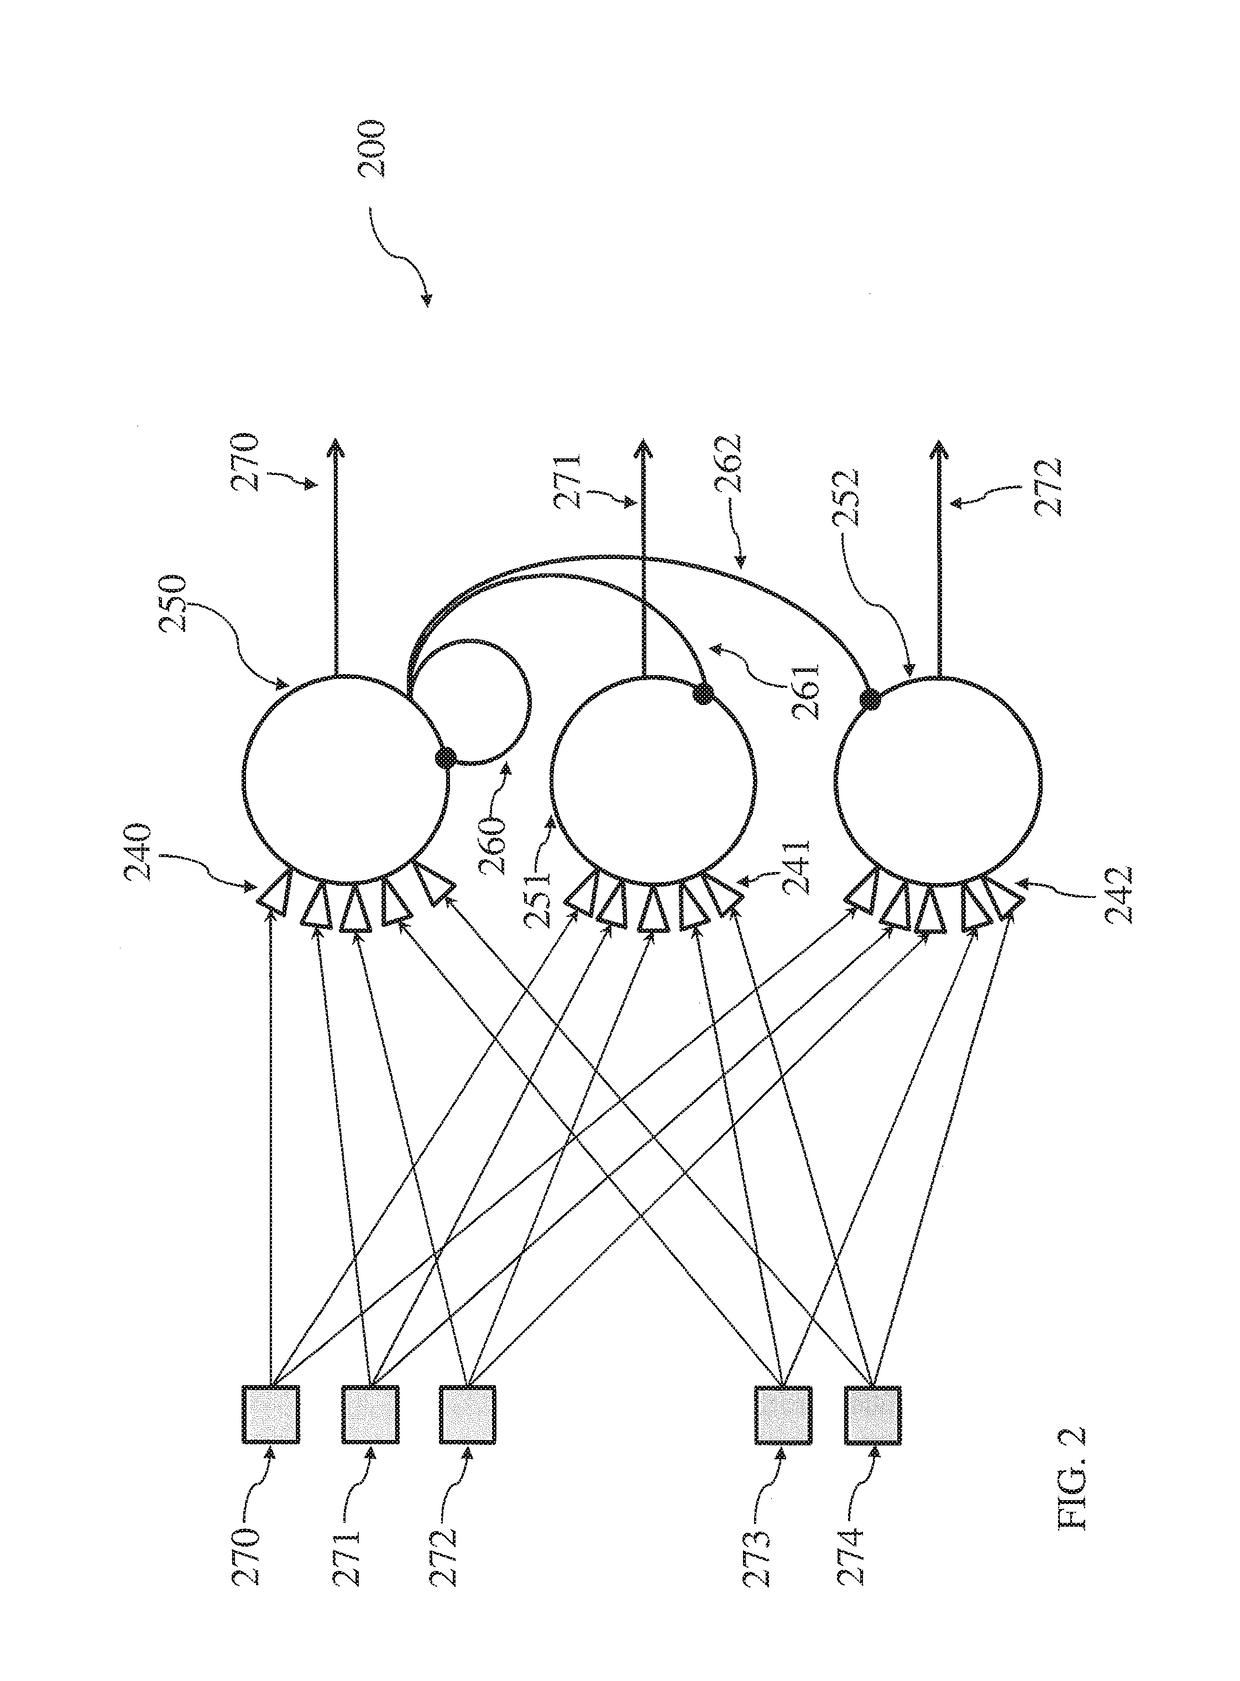 Neuromorphic architecture with multiple coupled neurons using internal state neuron information